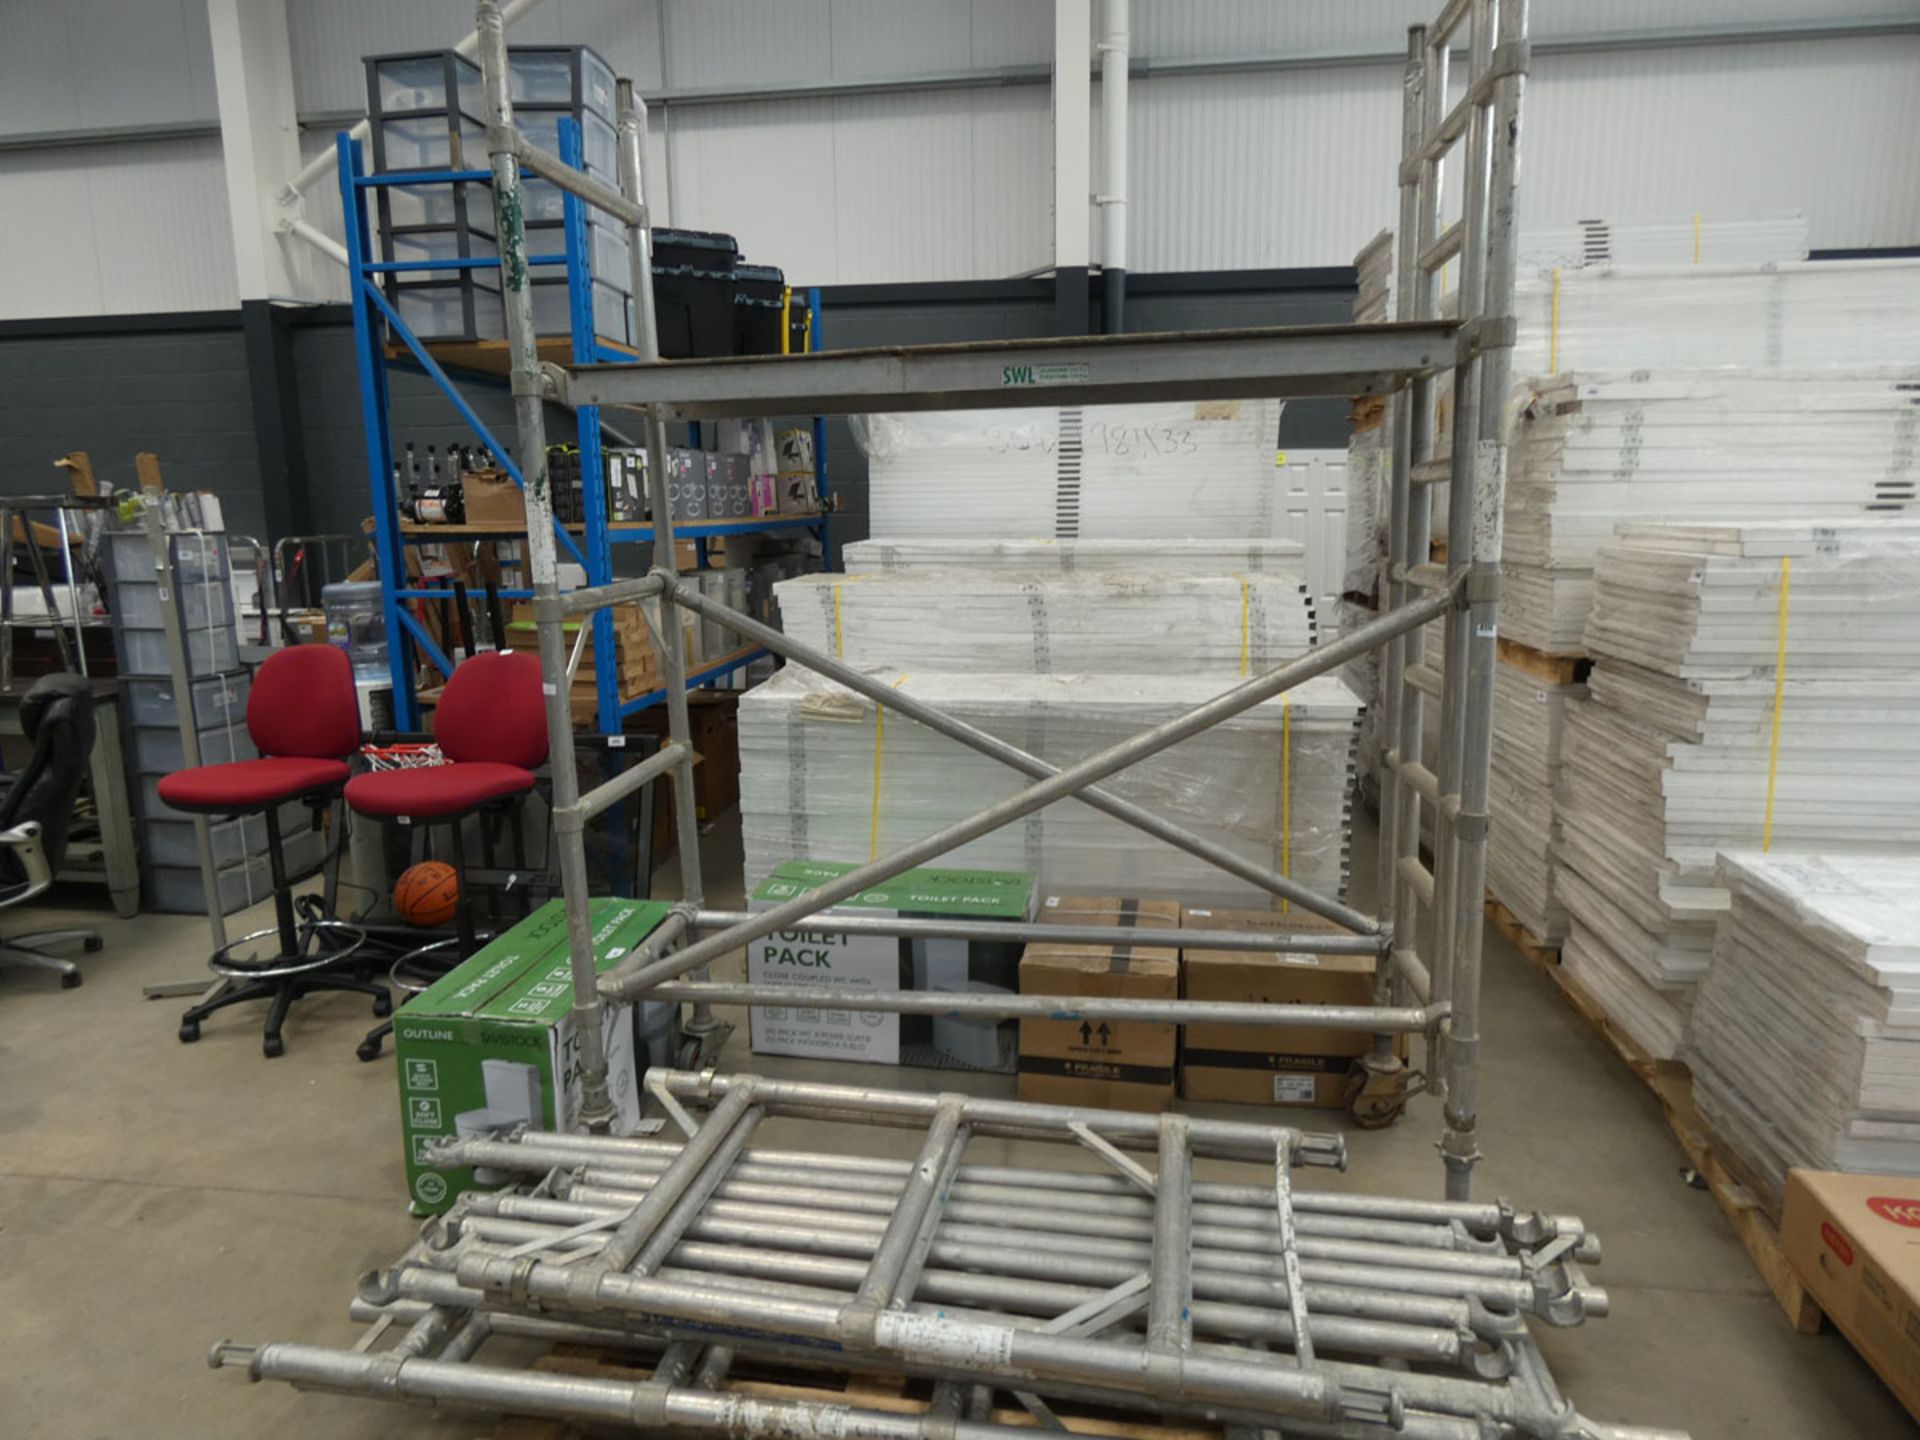 SlimLine aluminium scaffold tower Condition report: This item is in fairly good condtion